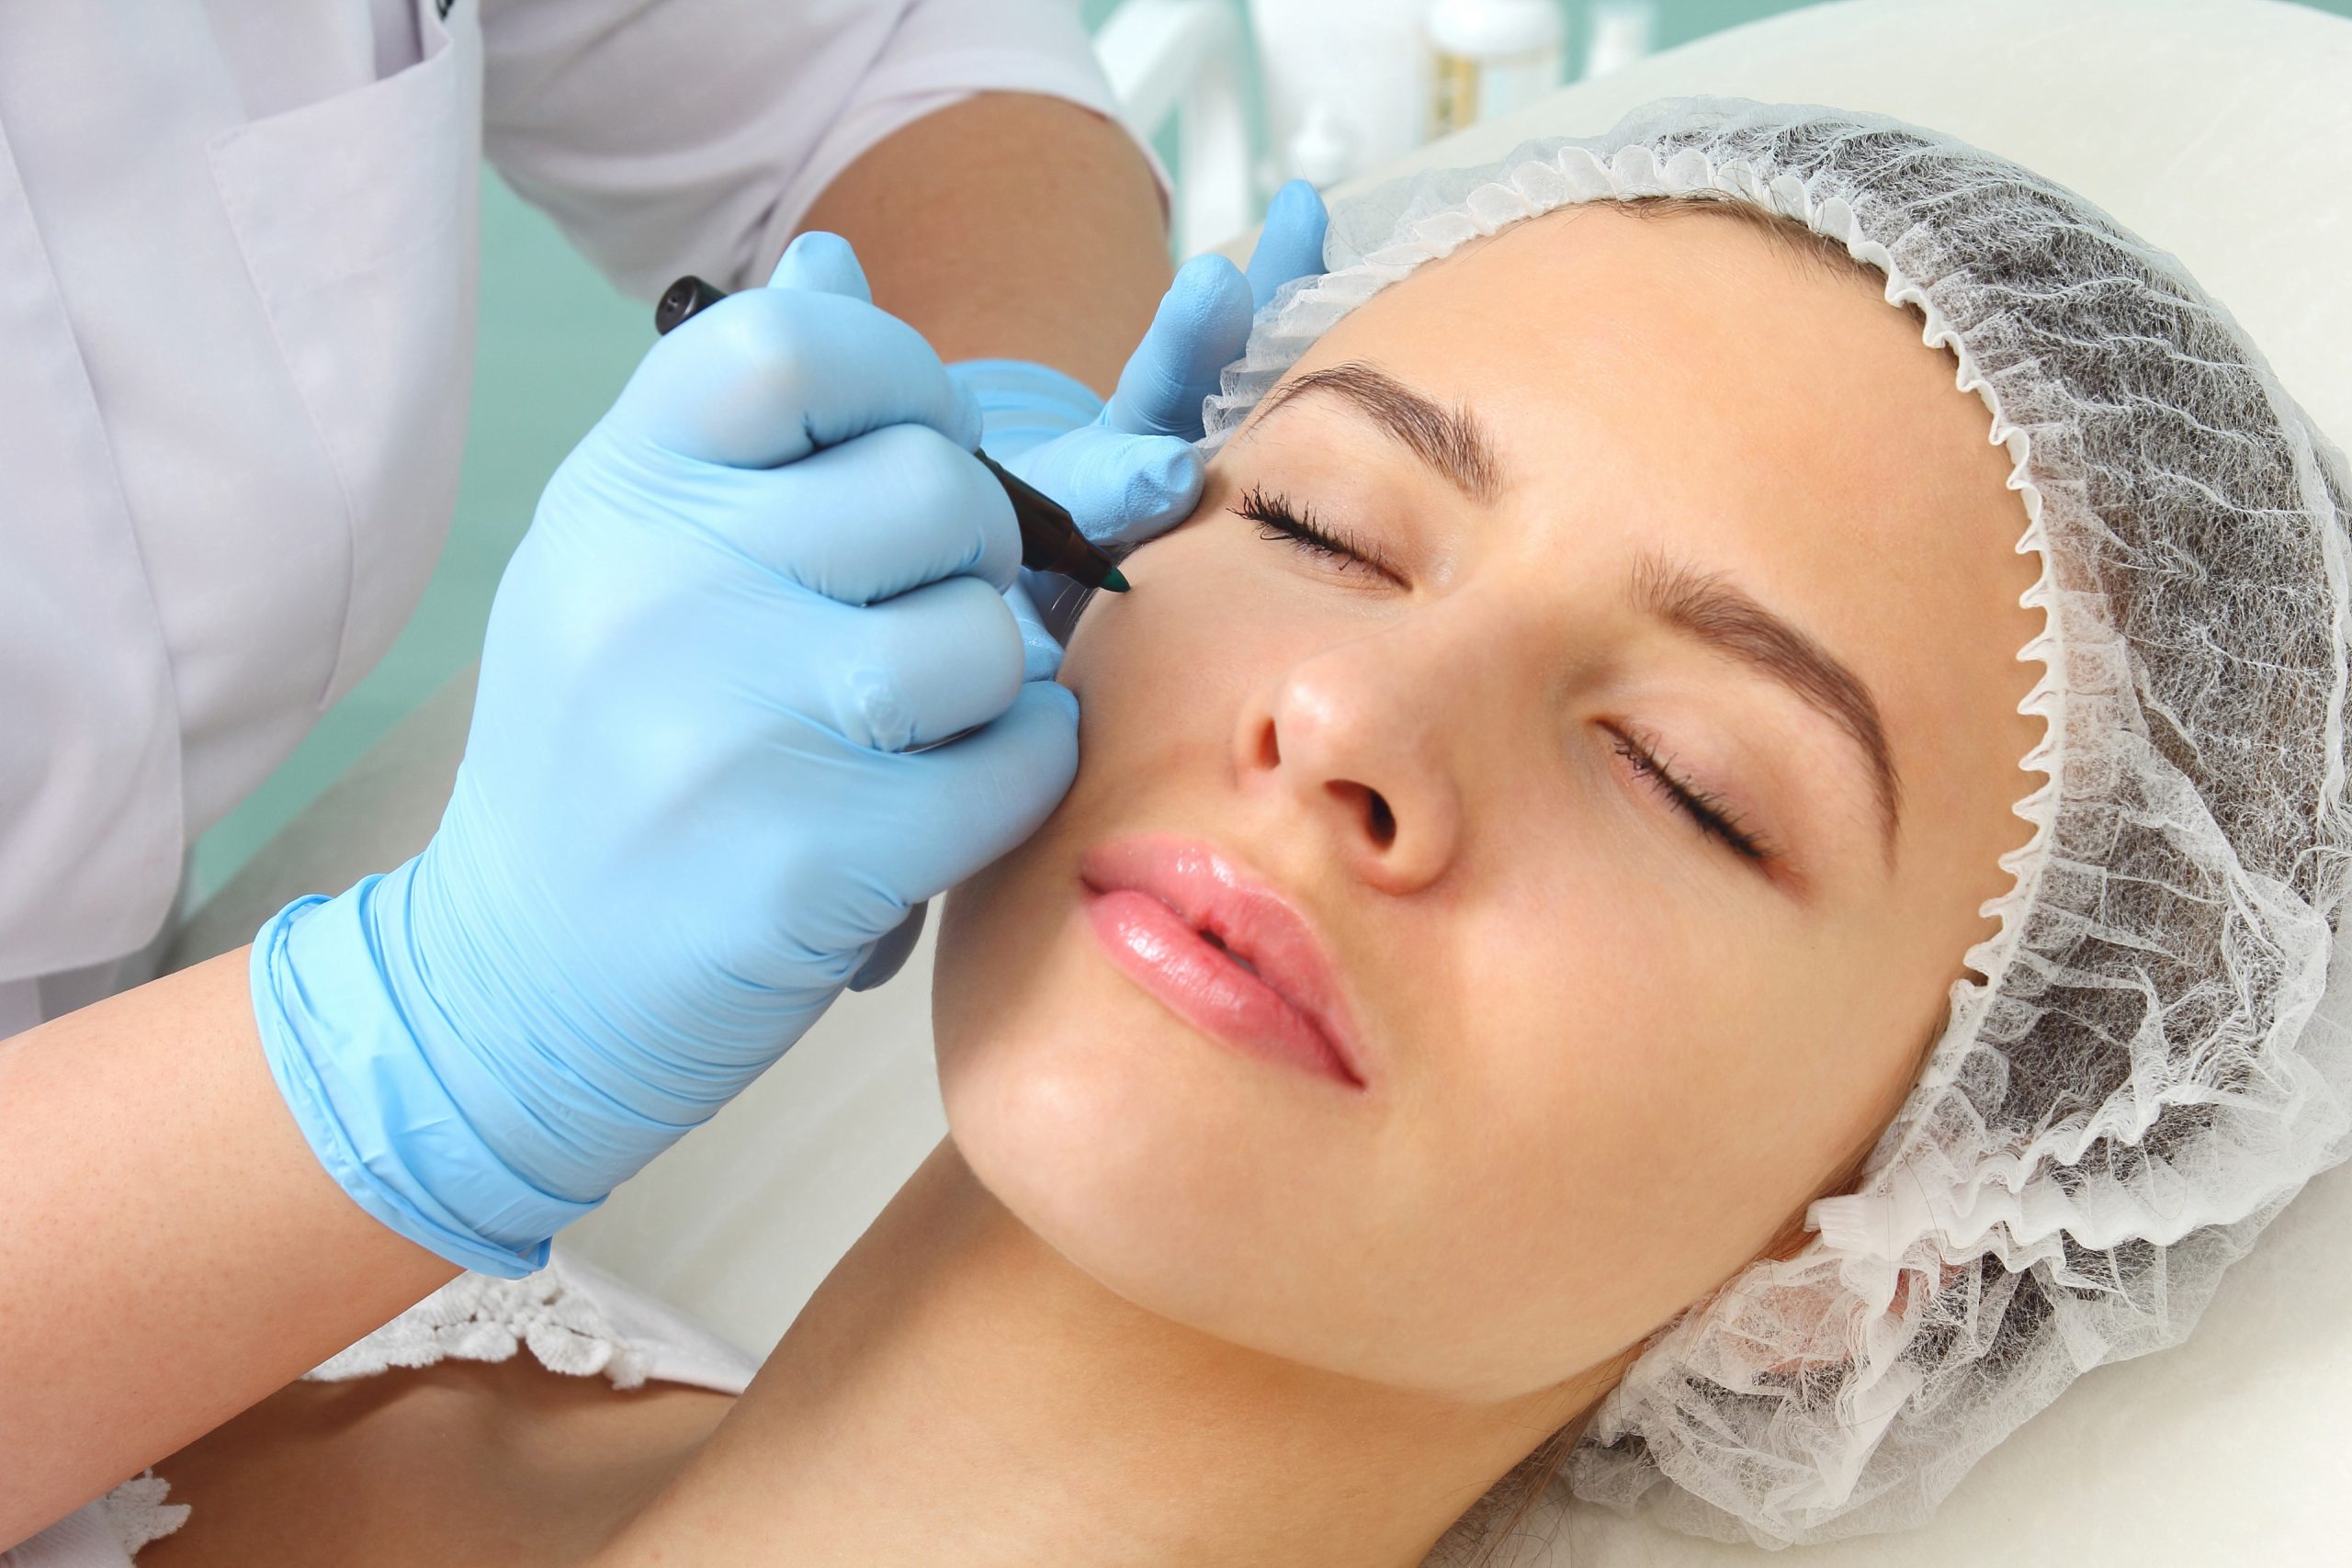 Surgical adjustments to the eyelids can correct drooping or create a more contoured effect.